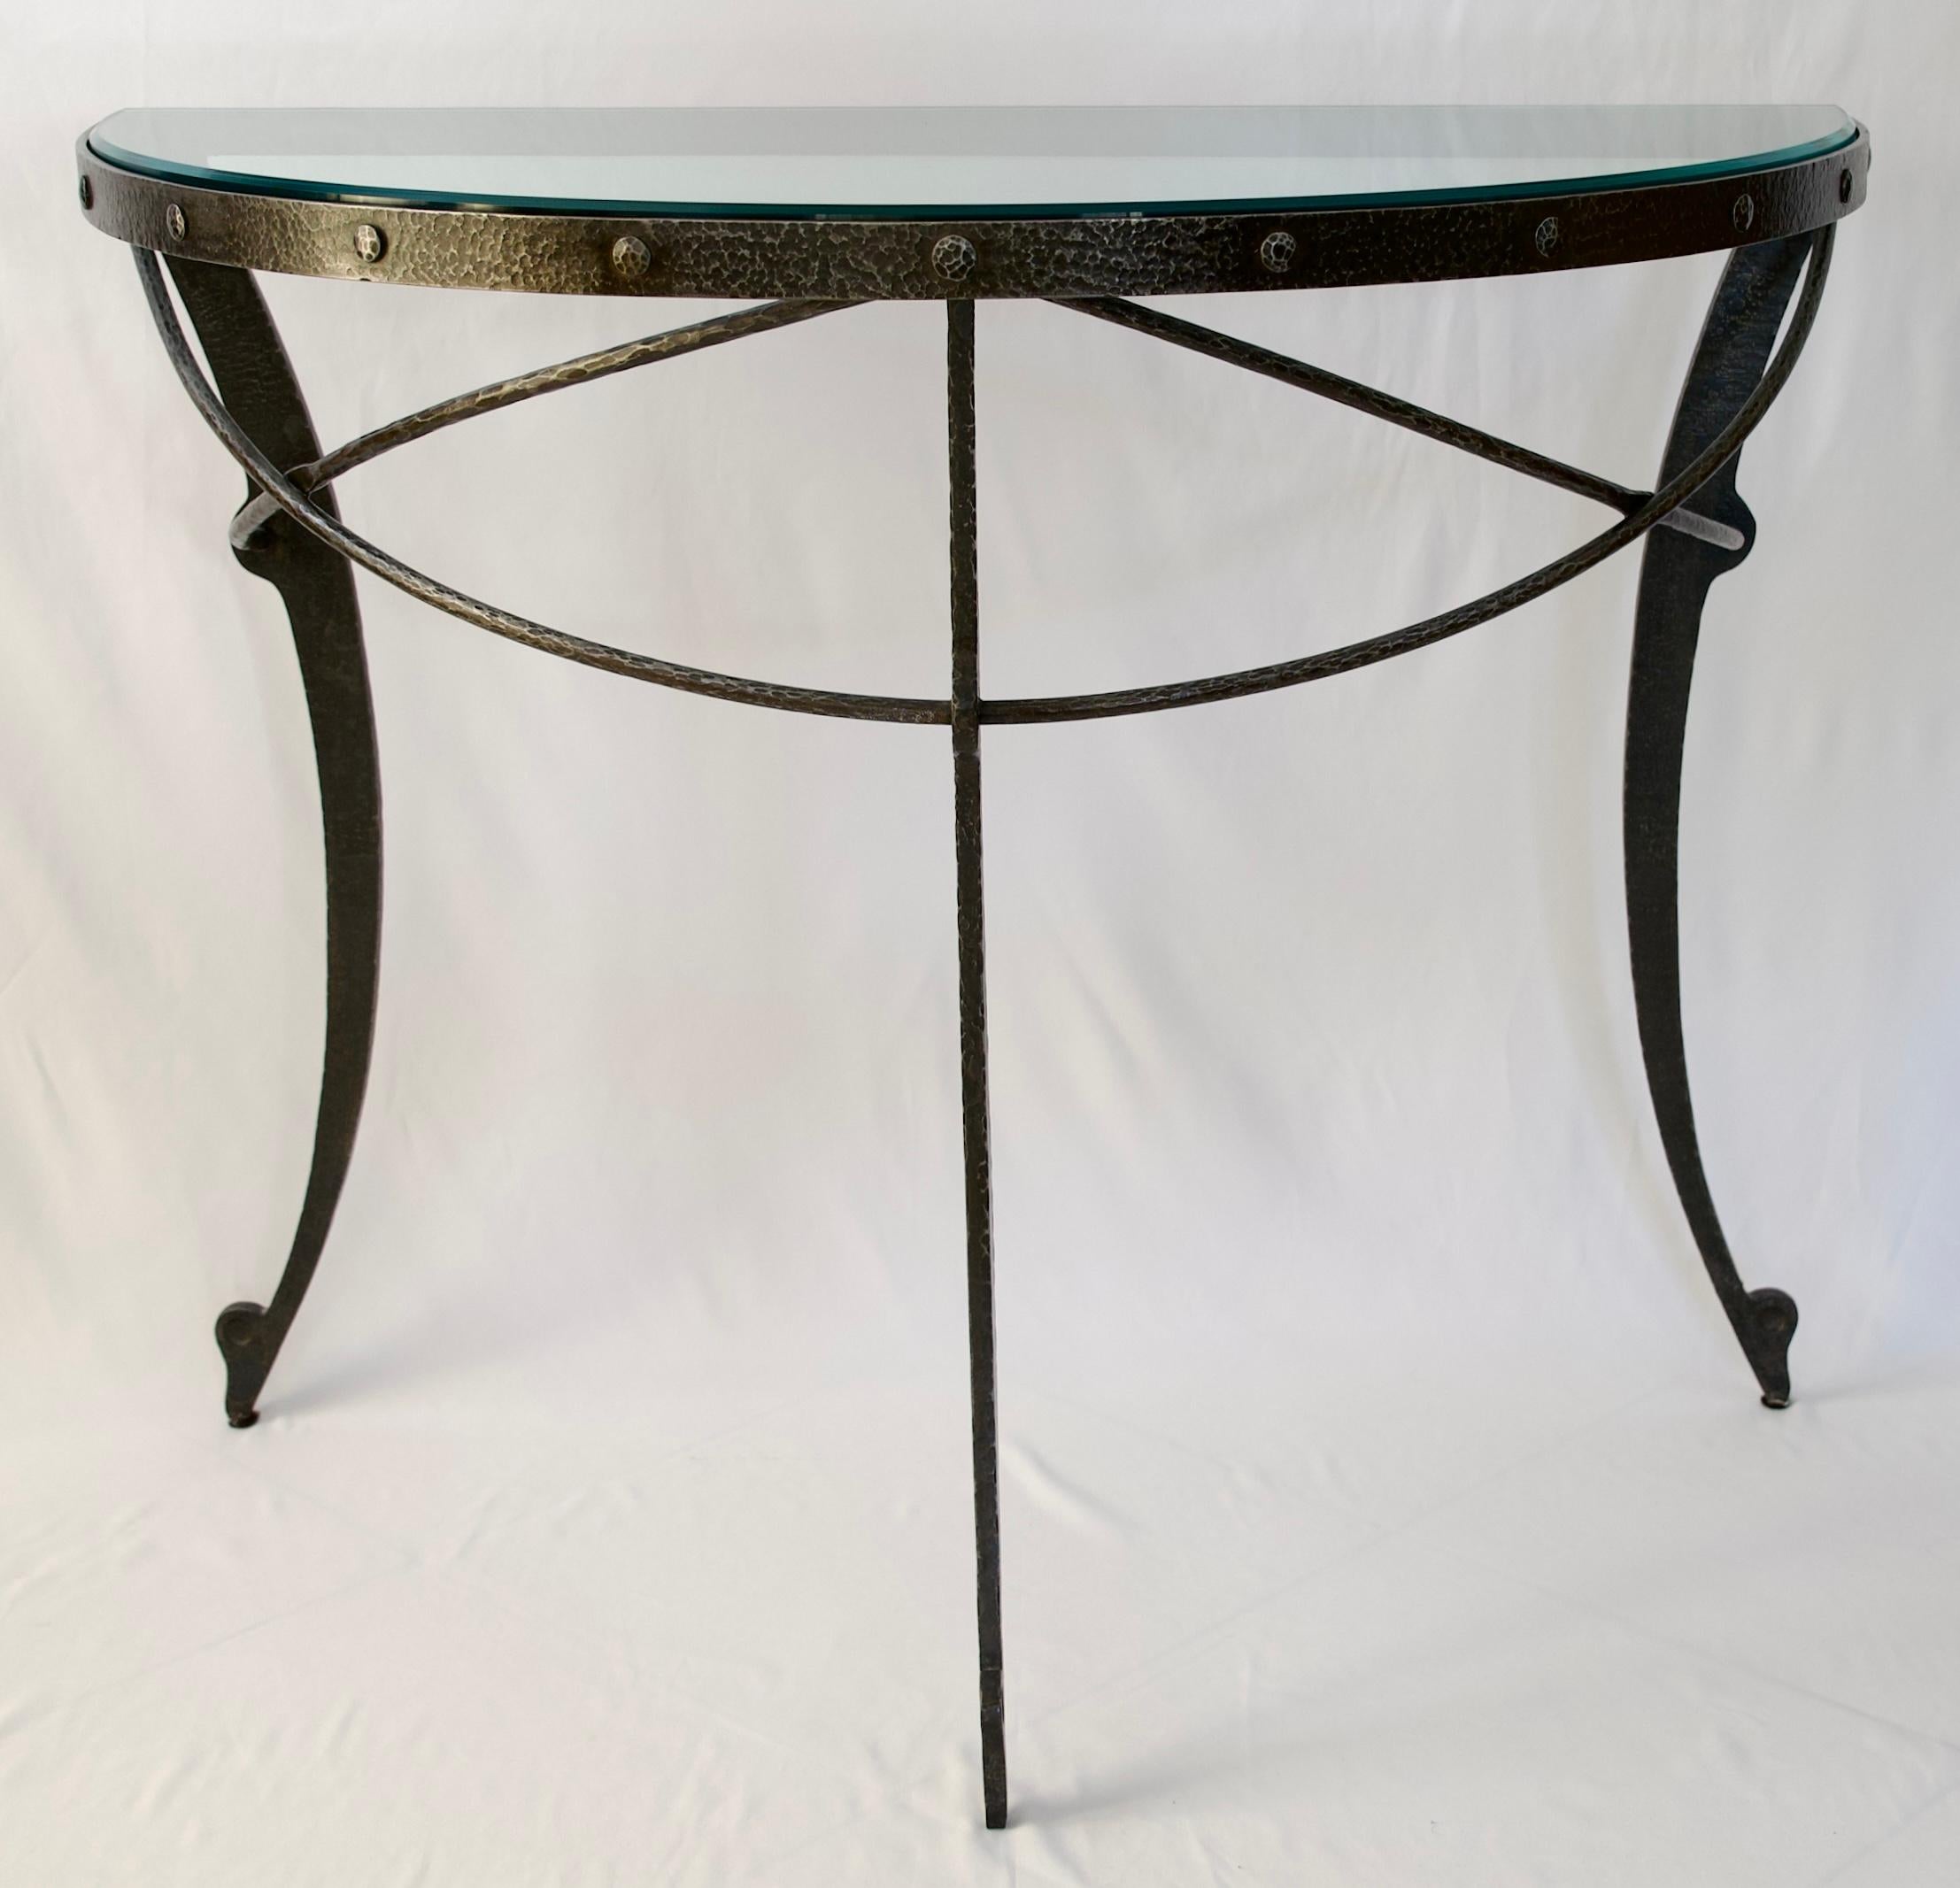 American Hollywood Regency Style Half Moon Console Table Iron & Glass, Bathroom Vanity For Sale